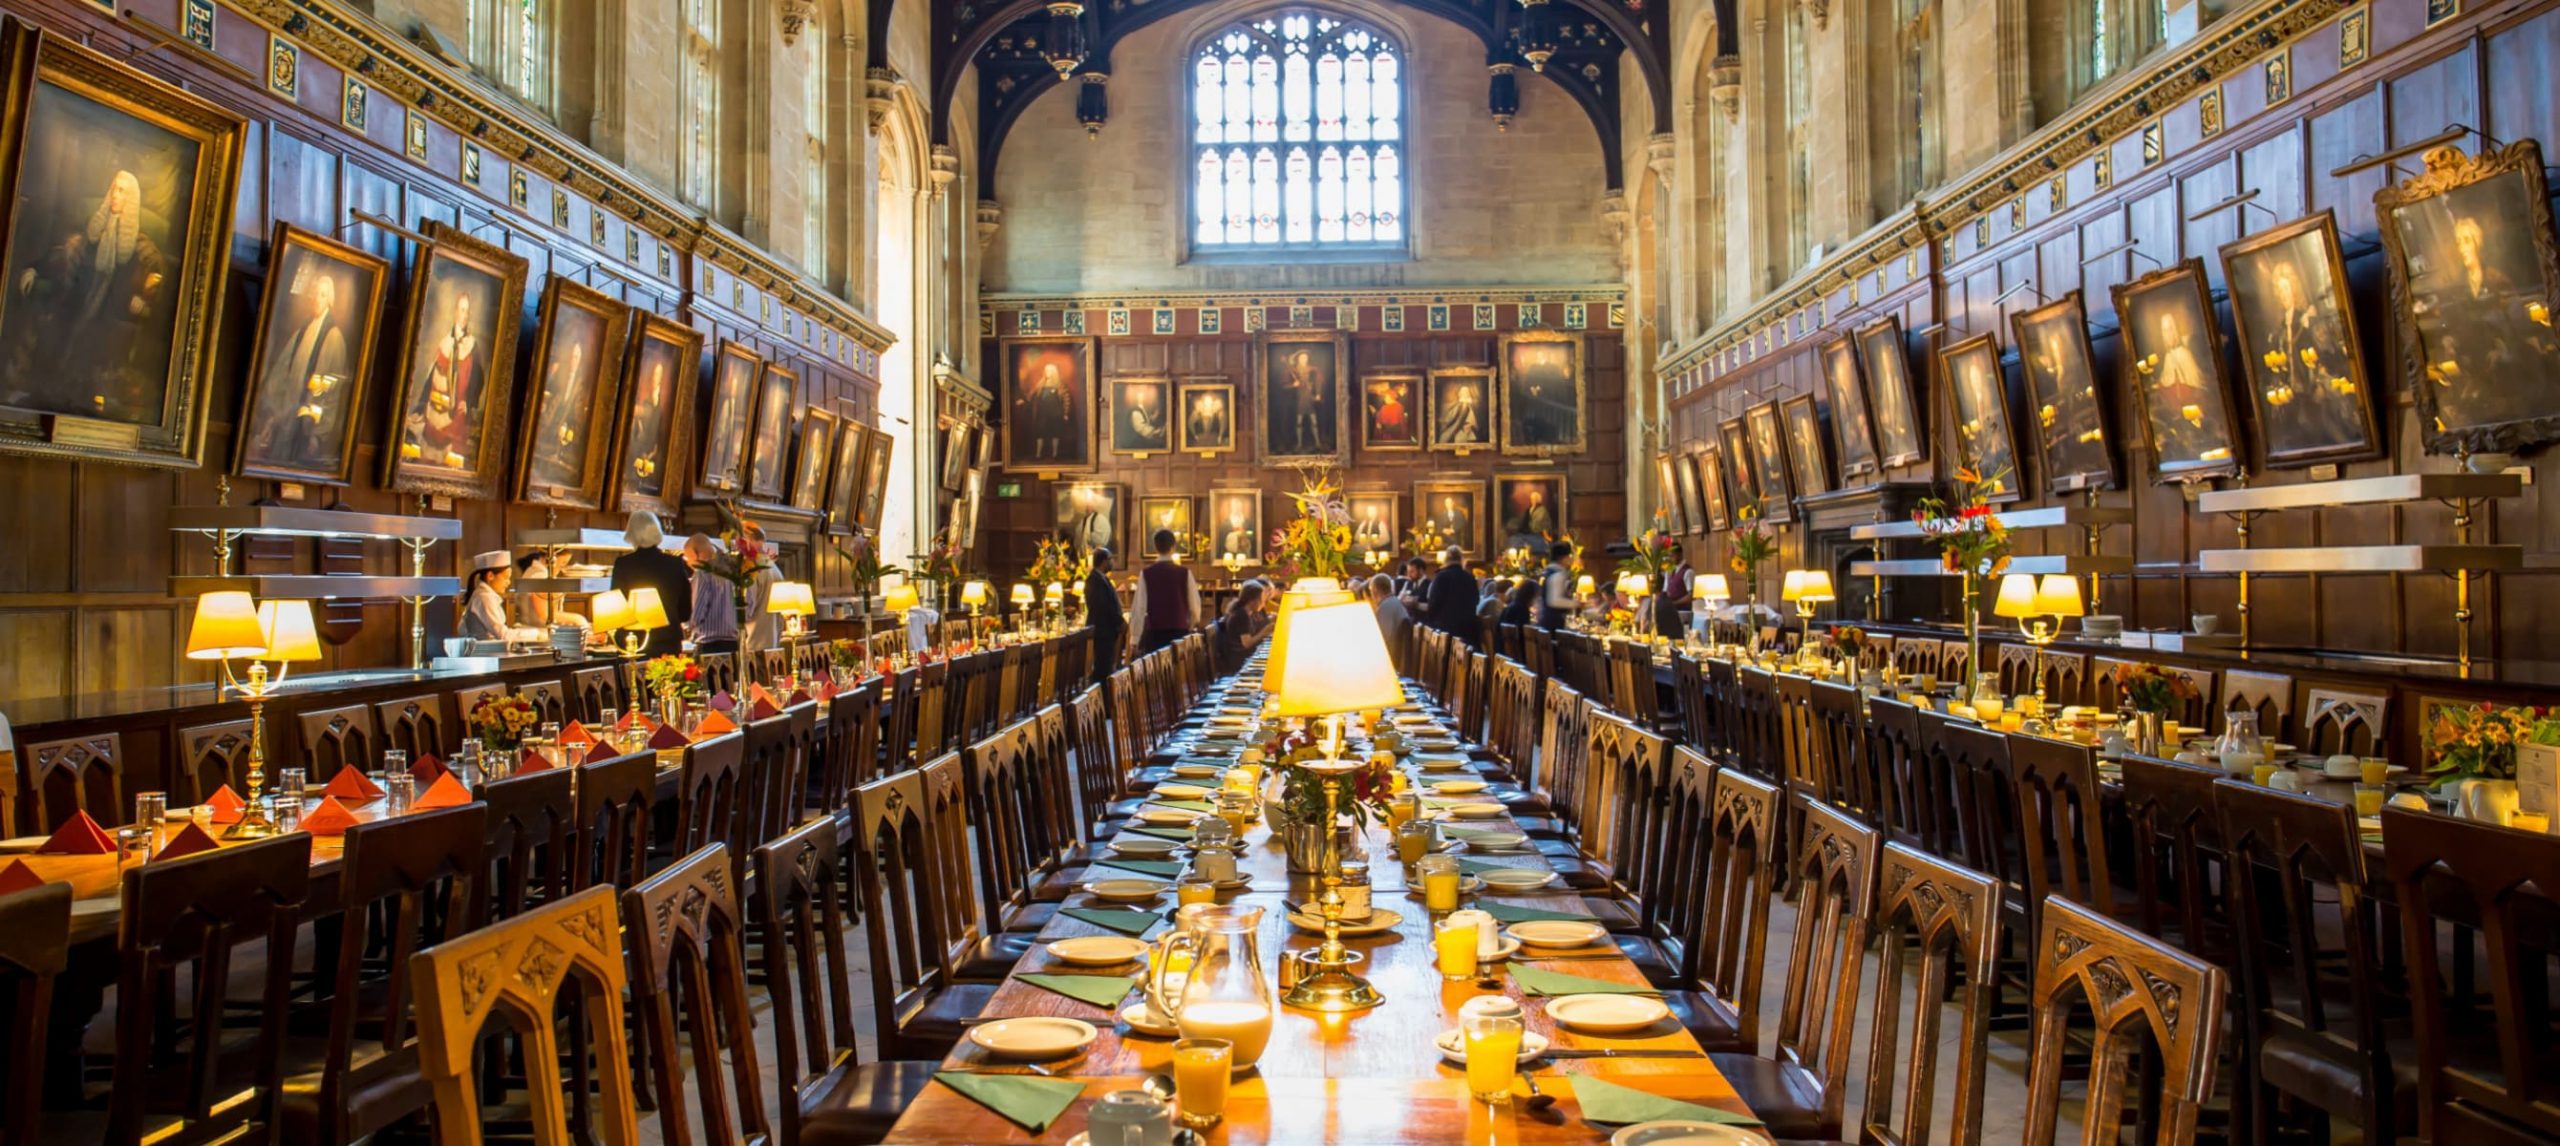 19 Must-Visit Harry Potter Filming Locations in the UK